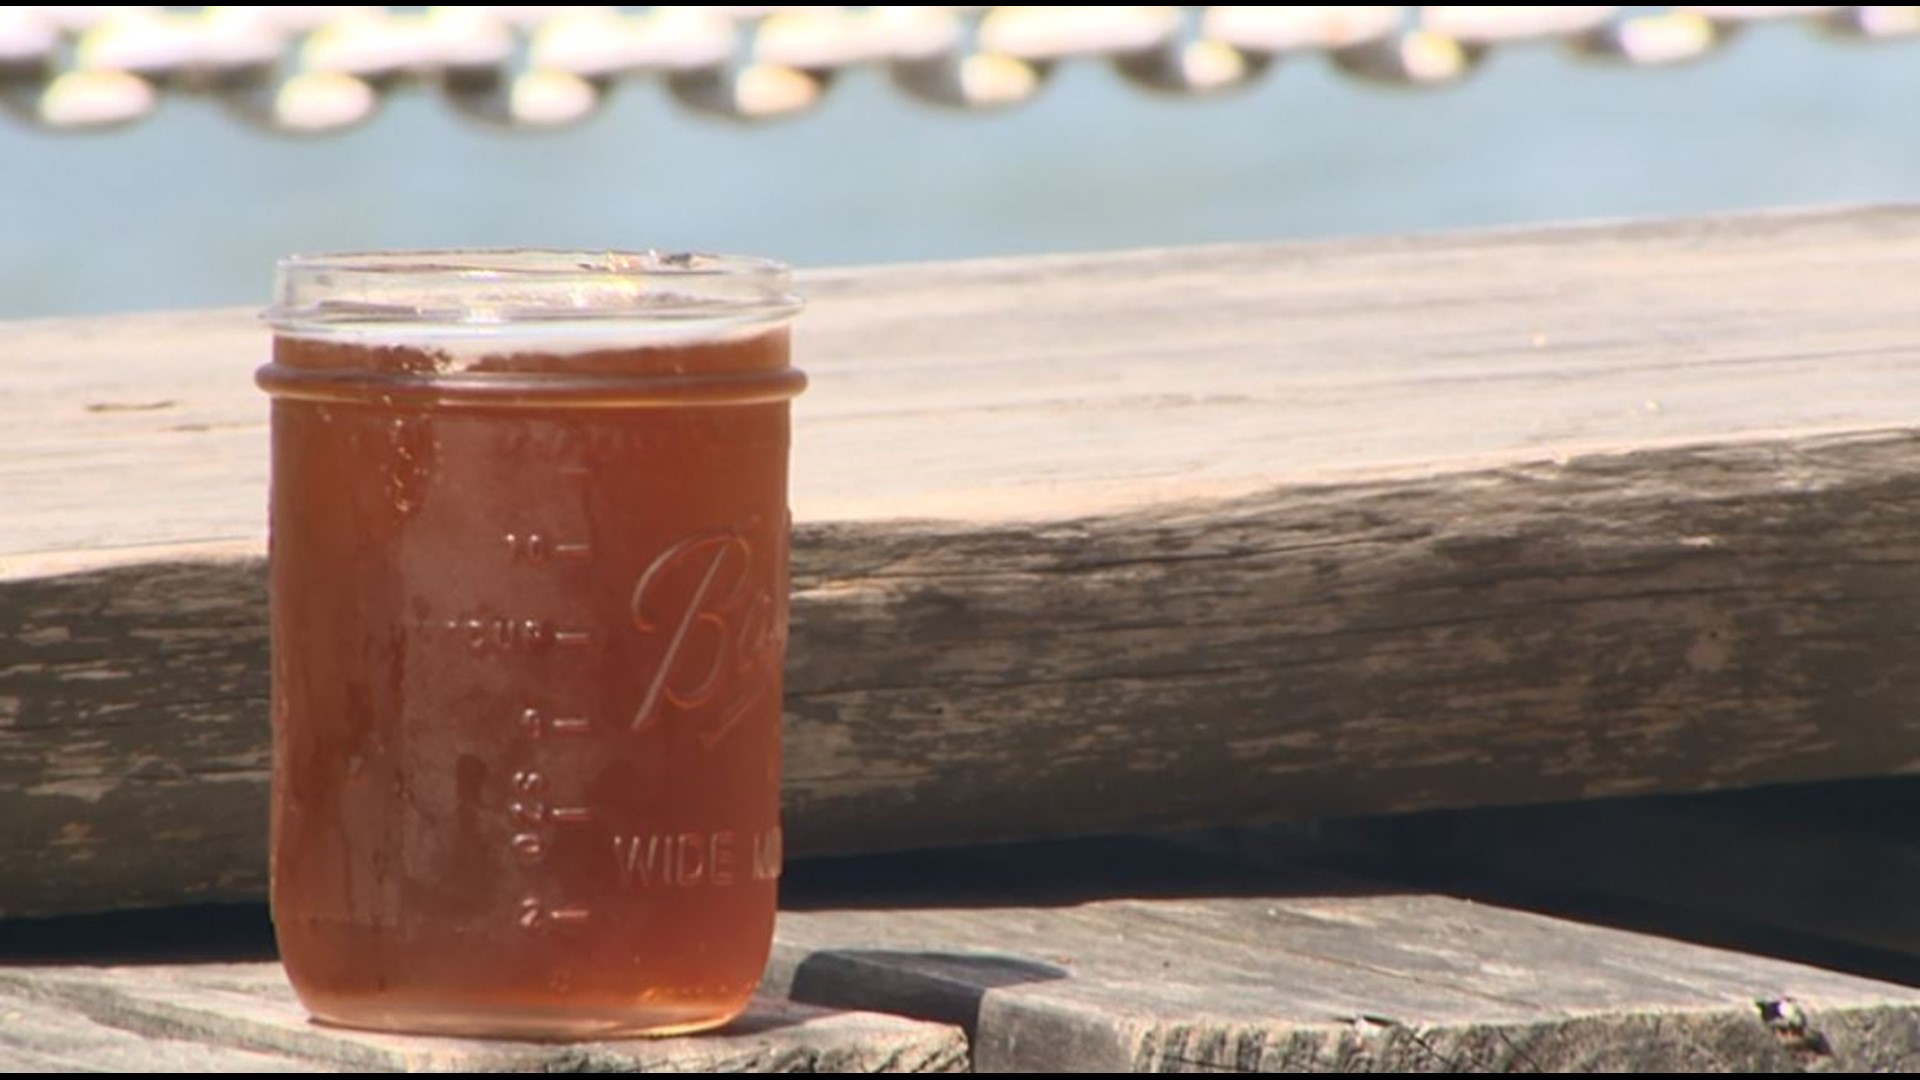 Union City Market's Friday 'Appy Hour is the perfect combo of salt and smoke. #k5evening